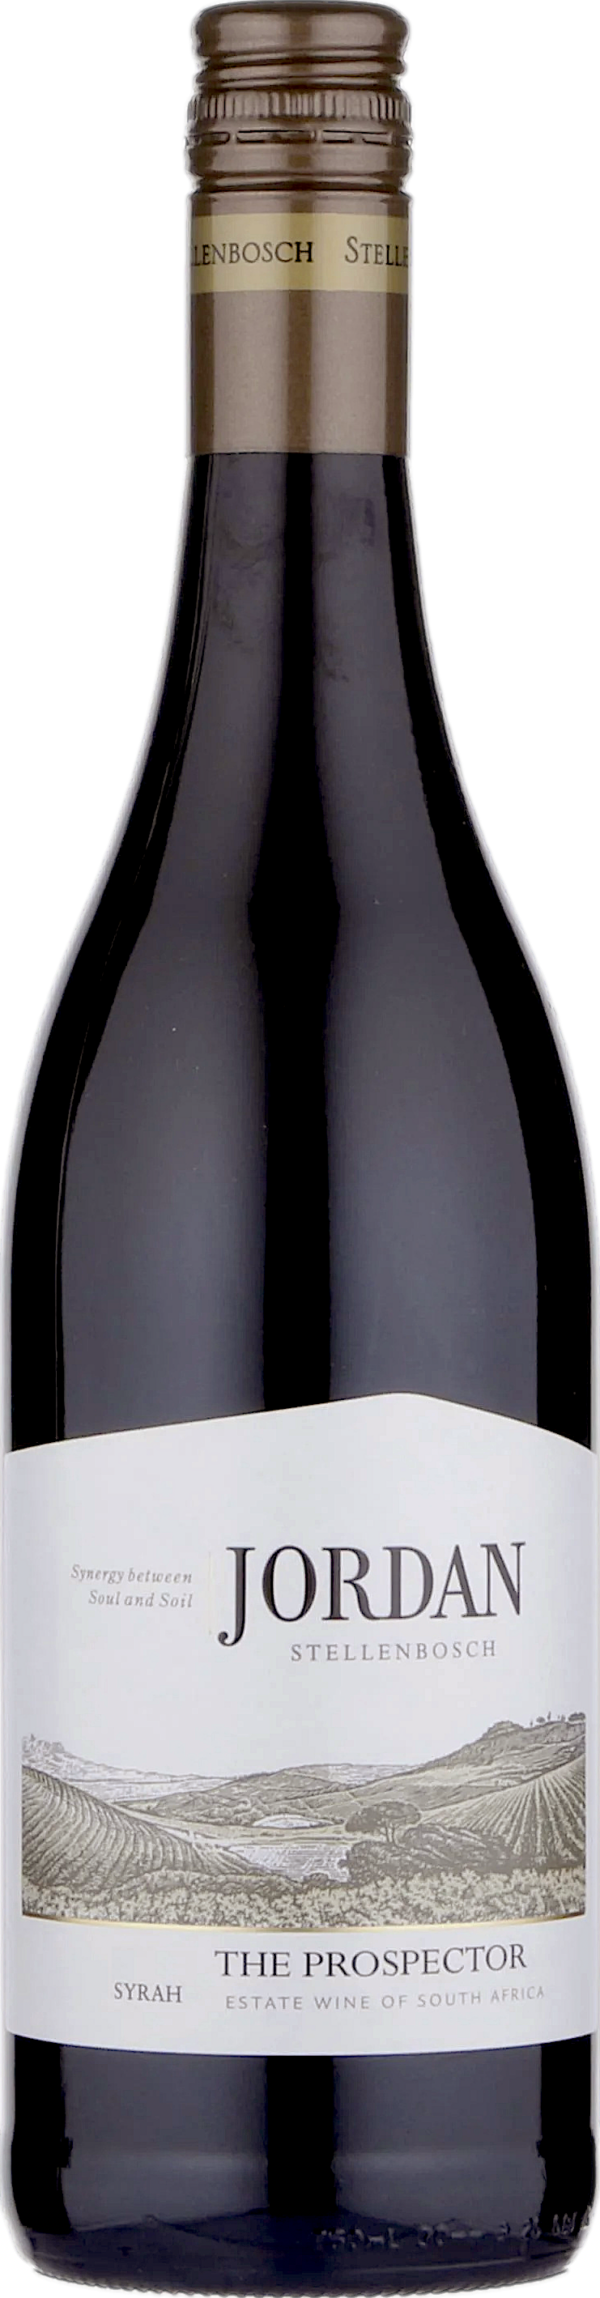 Product image of Jordan The Prospector Syrah 2021 from 8wines